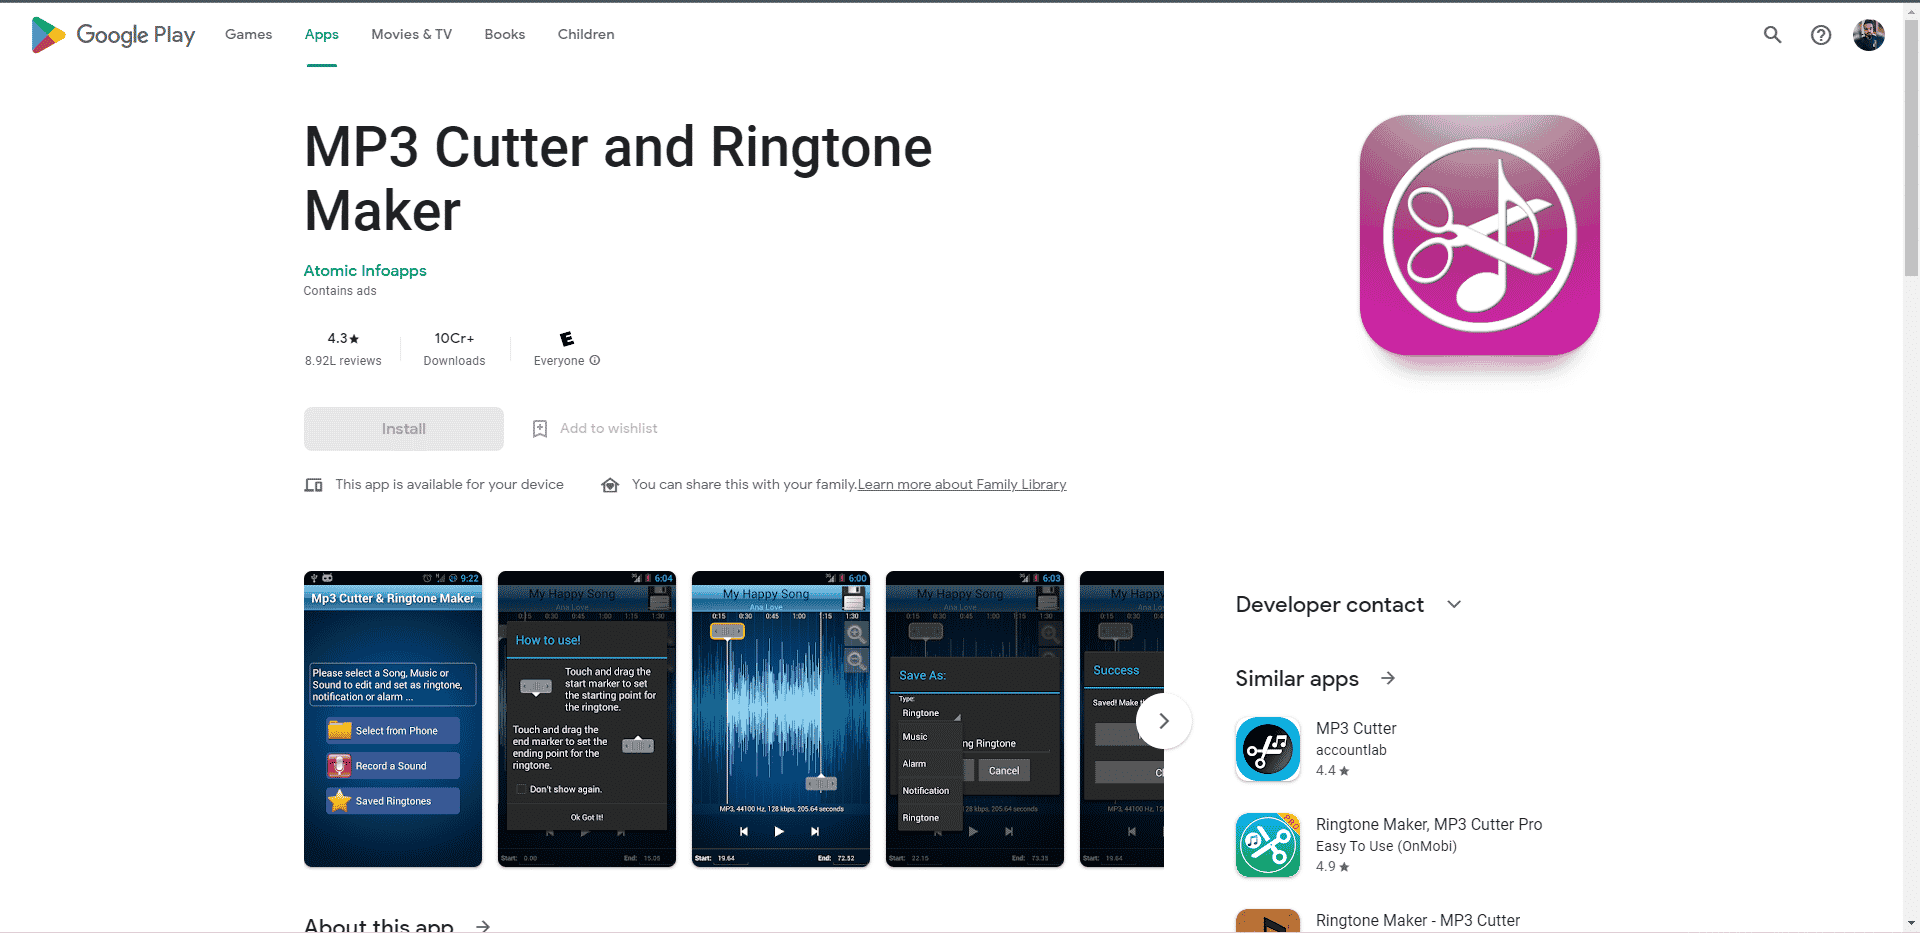 MP3 Cutter and Ringtone Maker Play Store webpage. Best Free Audio Editing Apps for Android